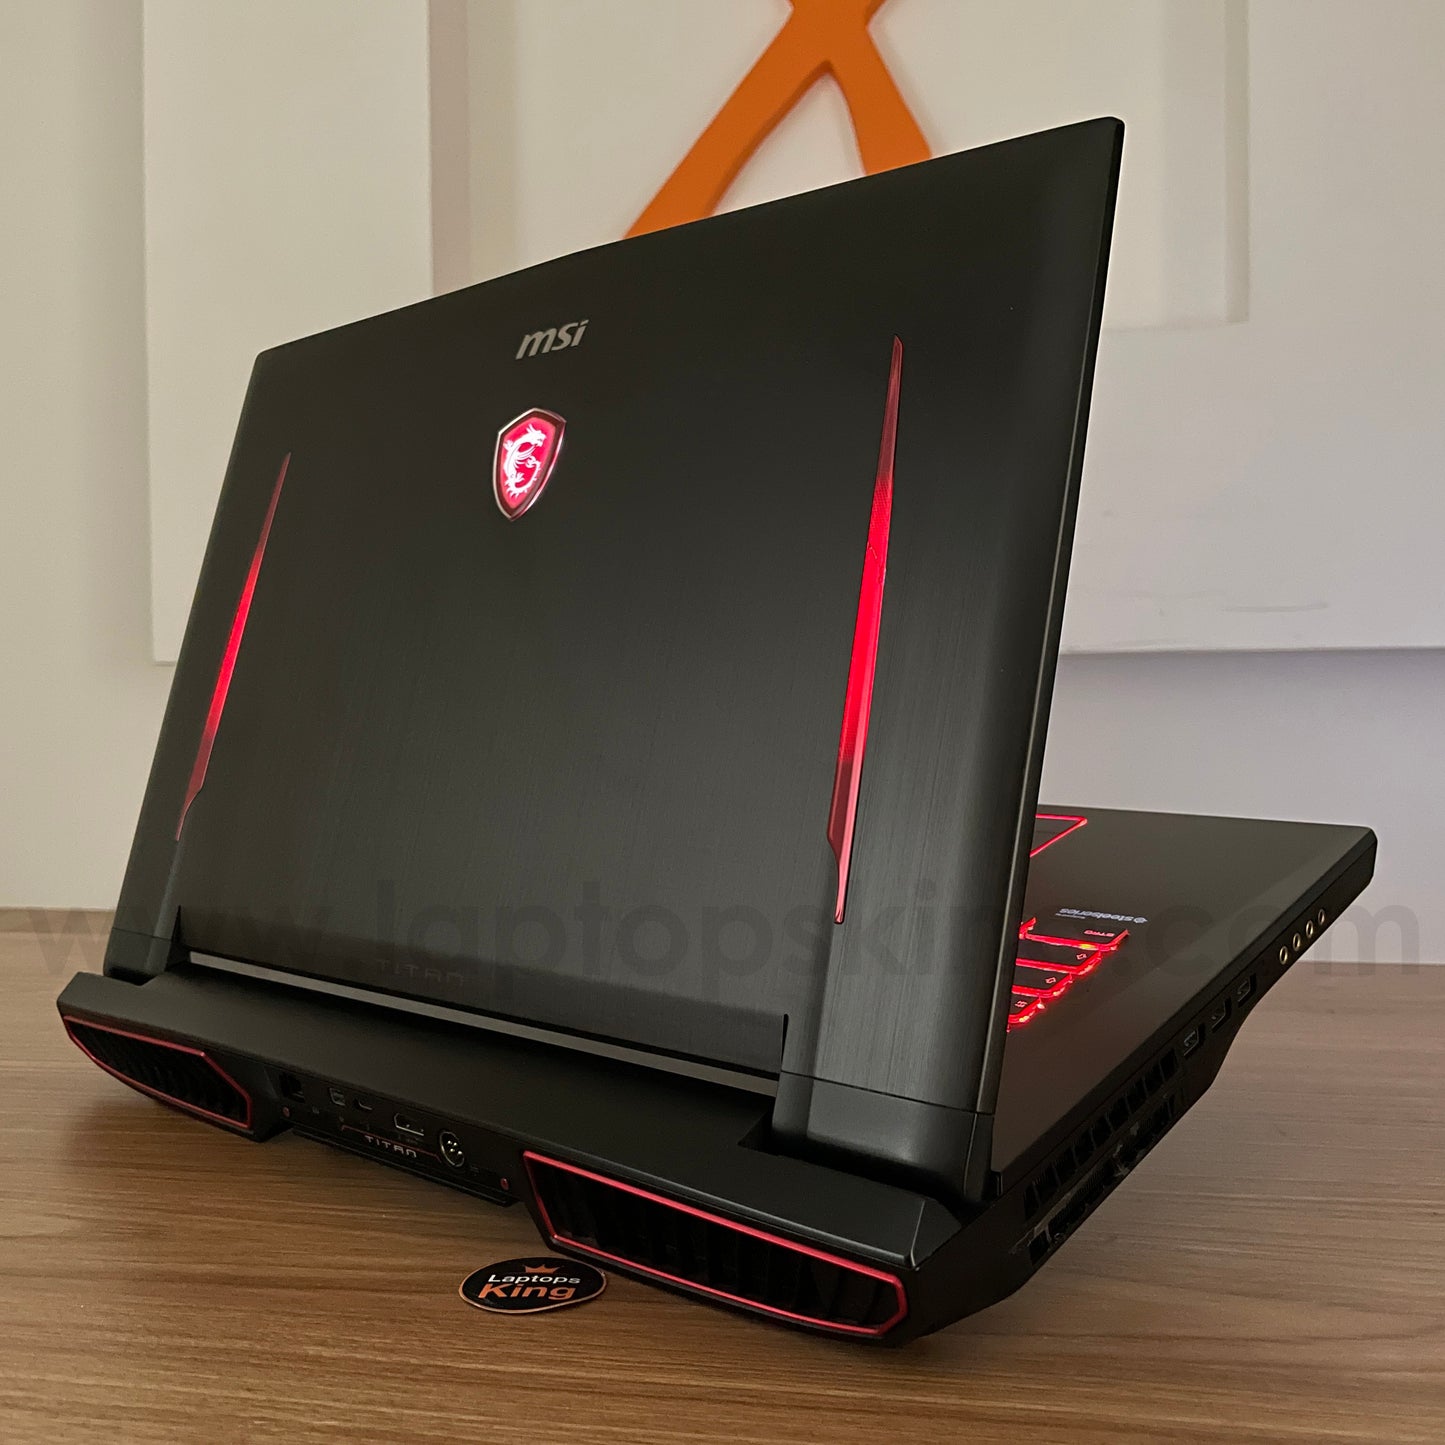 Msi Titan GT73EVR 7RE Steelseries Core i7-7700hq Gtx 1070 120hz 17.3" Gaming Laptop (Used Very Clean)